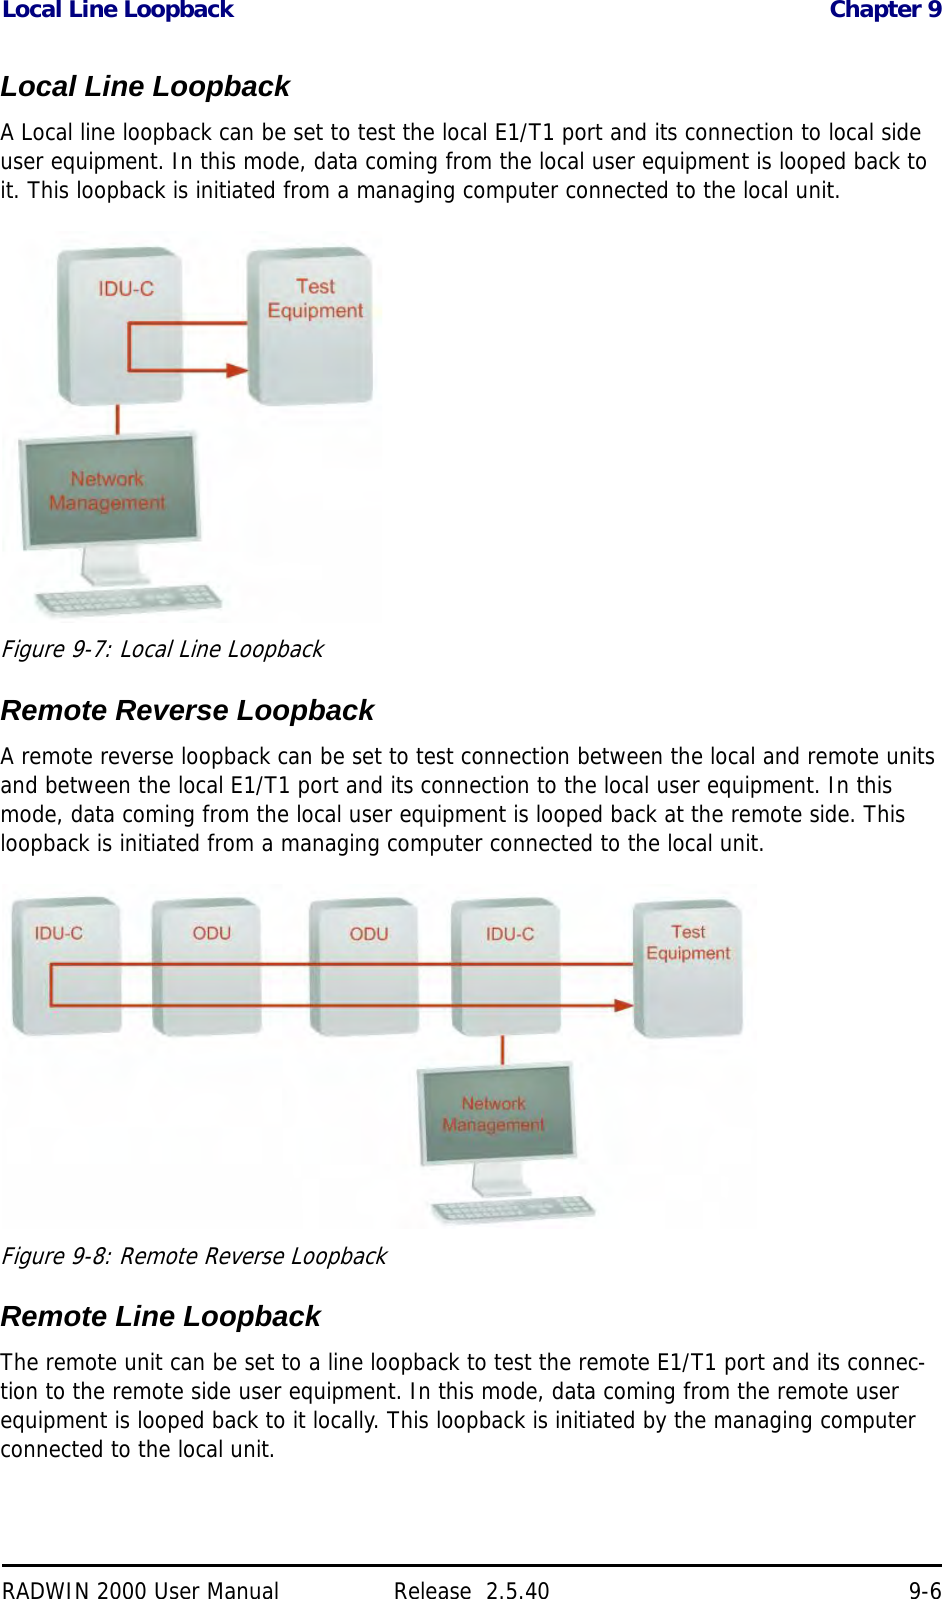 Local Line Loopback Chapter 9RADWIN 2000 User Manual Release  2.5.40 9-6Local Line LoopbackA Local line loopback can be set to test the local E1/T1 port and its connection to local side user equipment. In this mode, data coming from the local user equipment is looped back to it. This loopback is initiated from a managing computer connected to the local unit.Figure 9-7: Local Line LoopbackRemote Reverse LoopbackA remote reverse loopback can be set to test connection between the local and remote units and between the local E1/T1 port and its connection to the local user equipment. In this mode, data coming from the local user equipment is looped back at the remote side. This loopback is initiated from a managing computer connected to the local unit.Figure 9-8: Remote Reverse LoopbackRemote Line LoopbackThe remote unit can be set to a line loopback to test the remote E1/T1 port and its connec-tion to the remote side user equipment. In this mode, data coming from the remote user equipment is looped back to it locally. This loopback is initiated by the managing computer connected to the local unit.